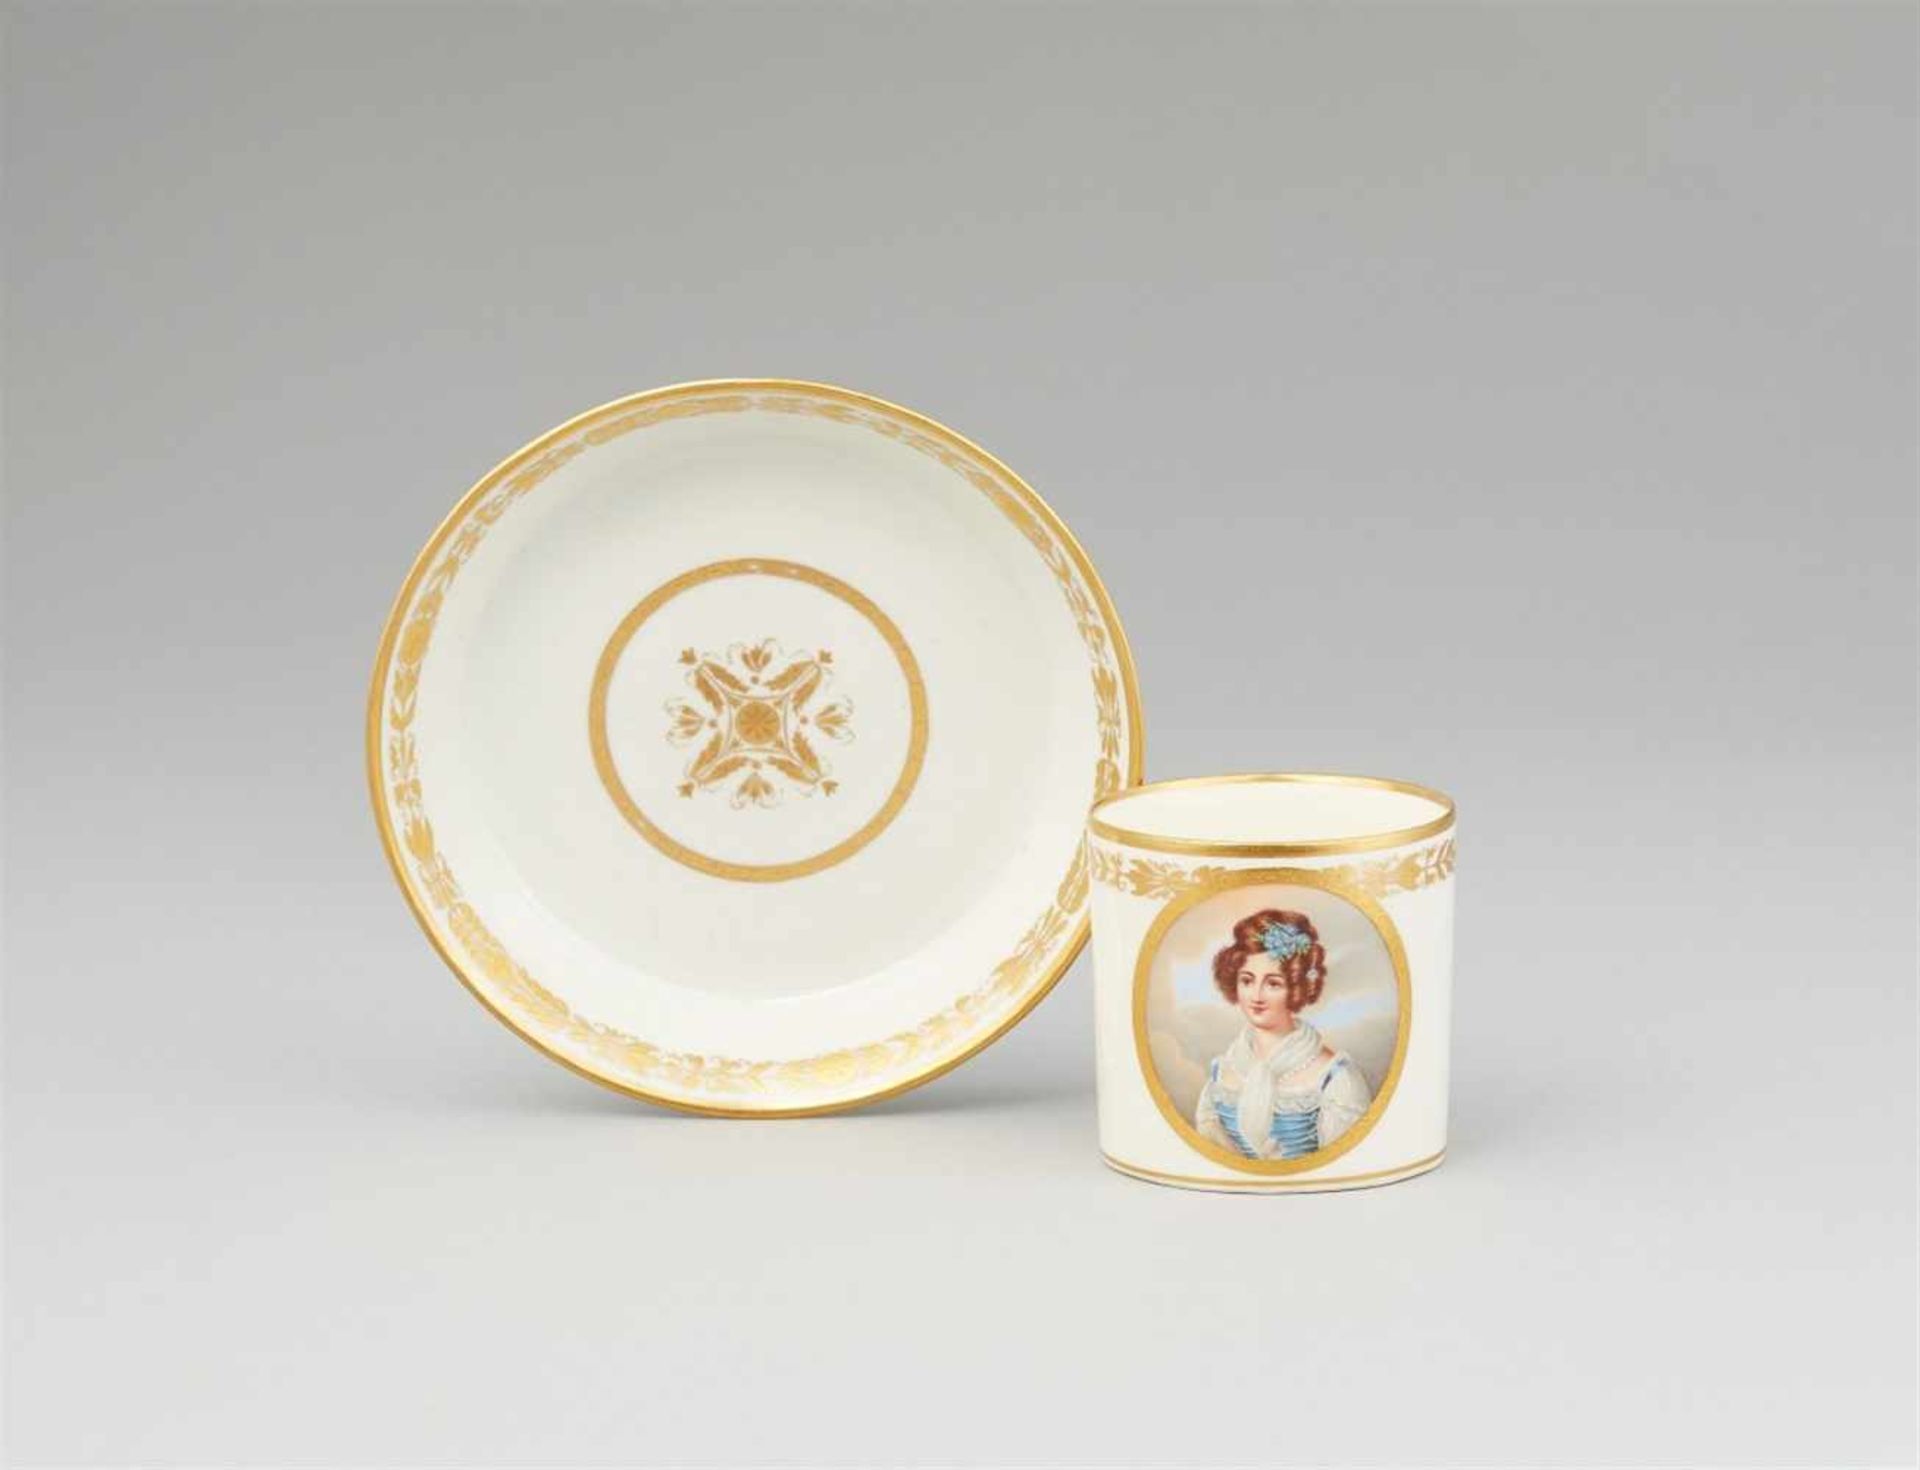 A Vienna porcelain cup with a portrait of a young ladyOf cylindrical form with original saucer. Blue